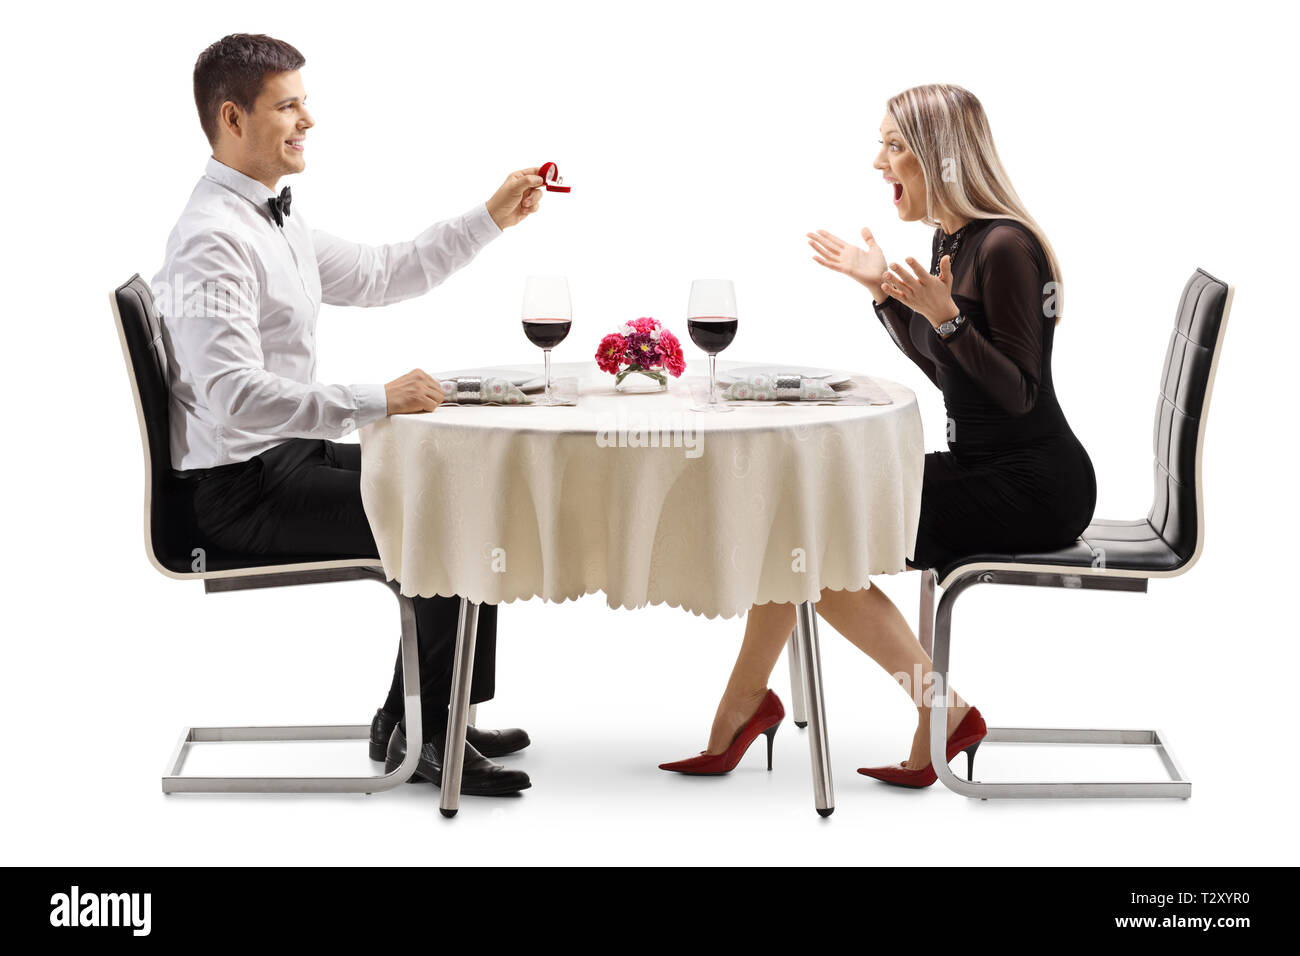 Full length profile shot of a young man proposing a marriage with a ring to a young woman at a restaurant table isolated on white background Stock Photo